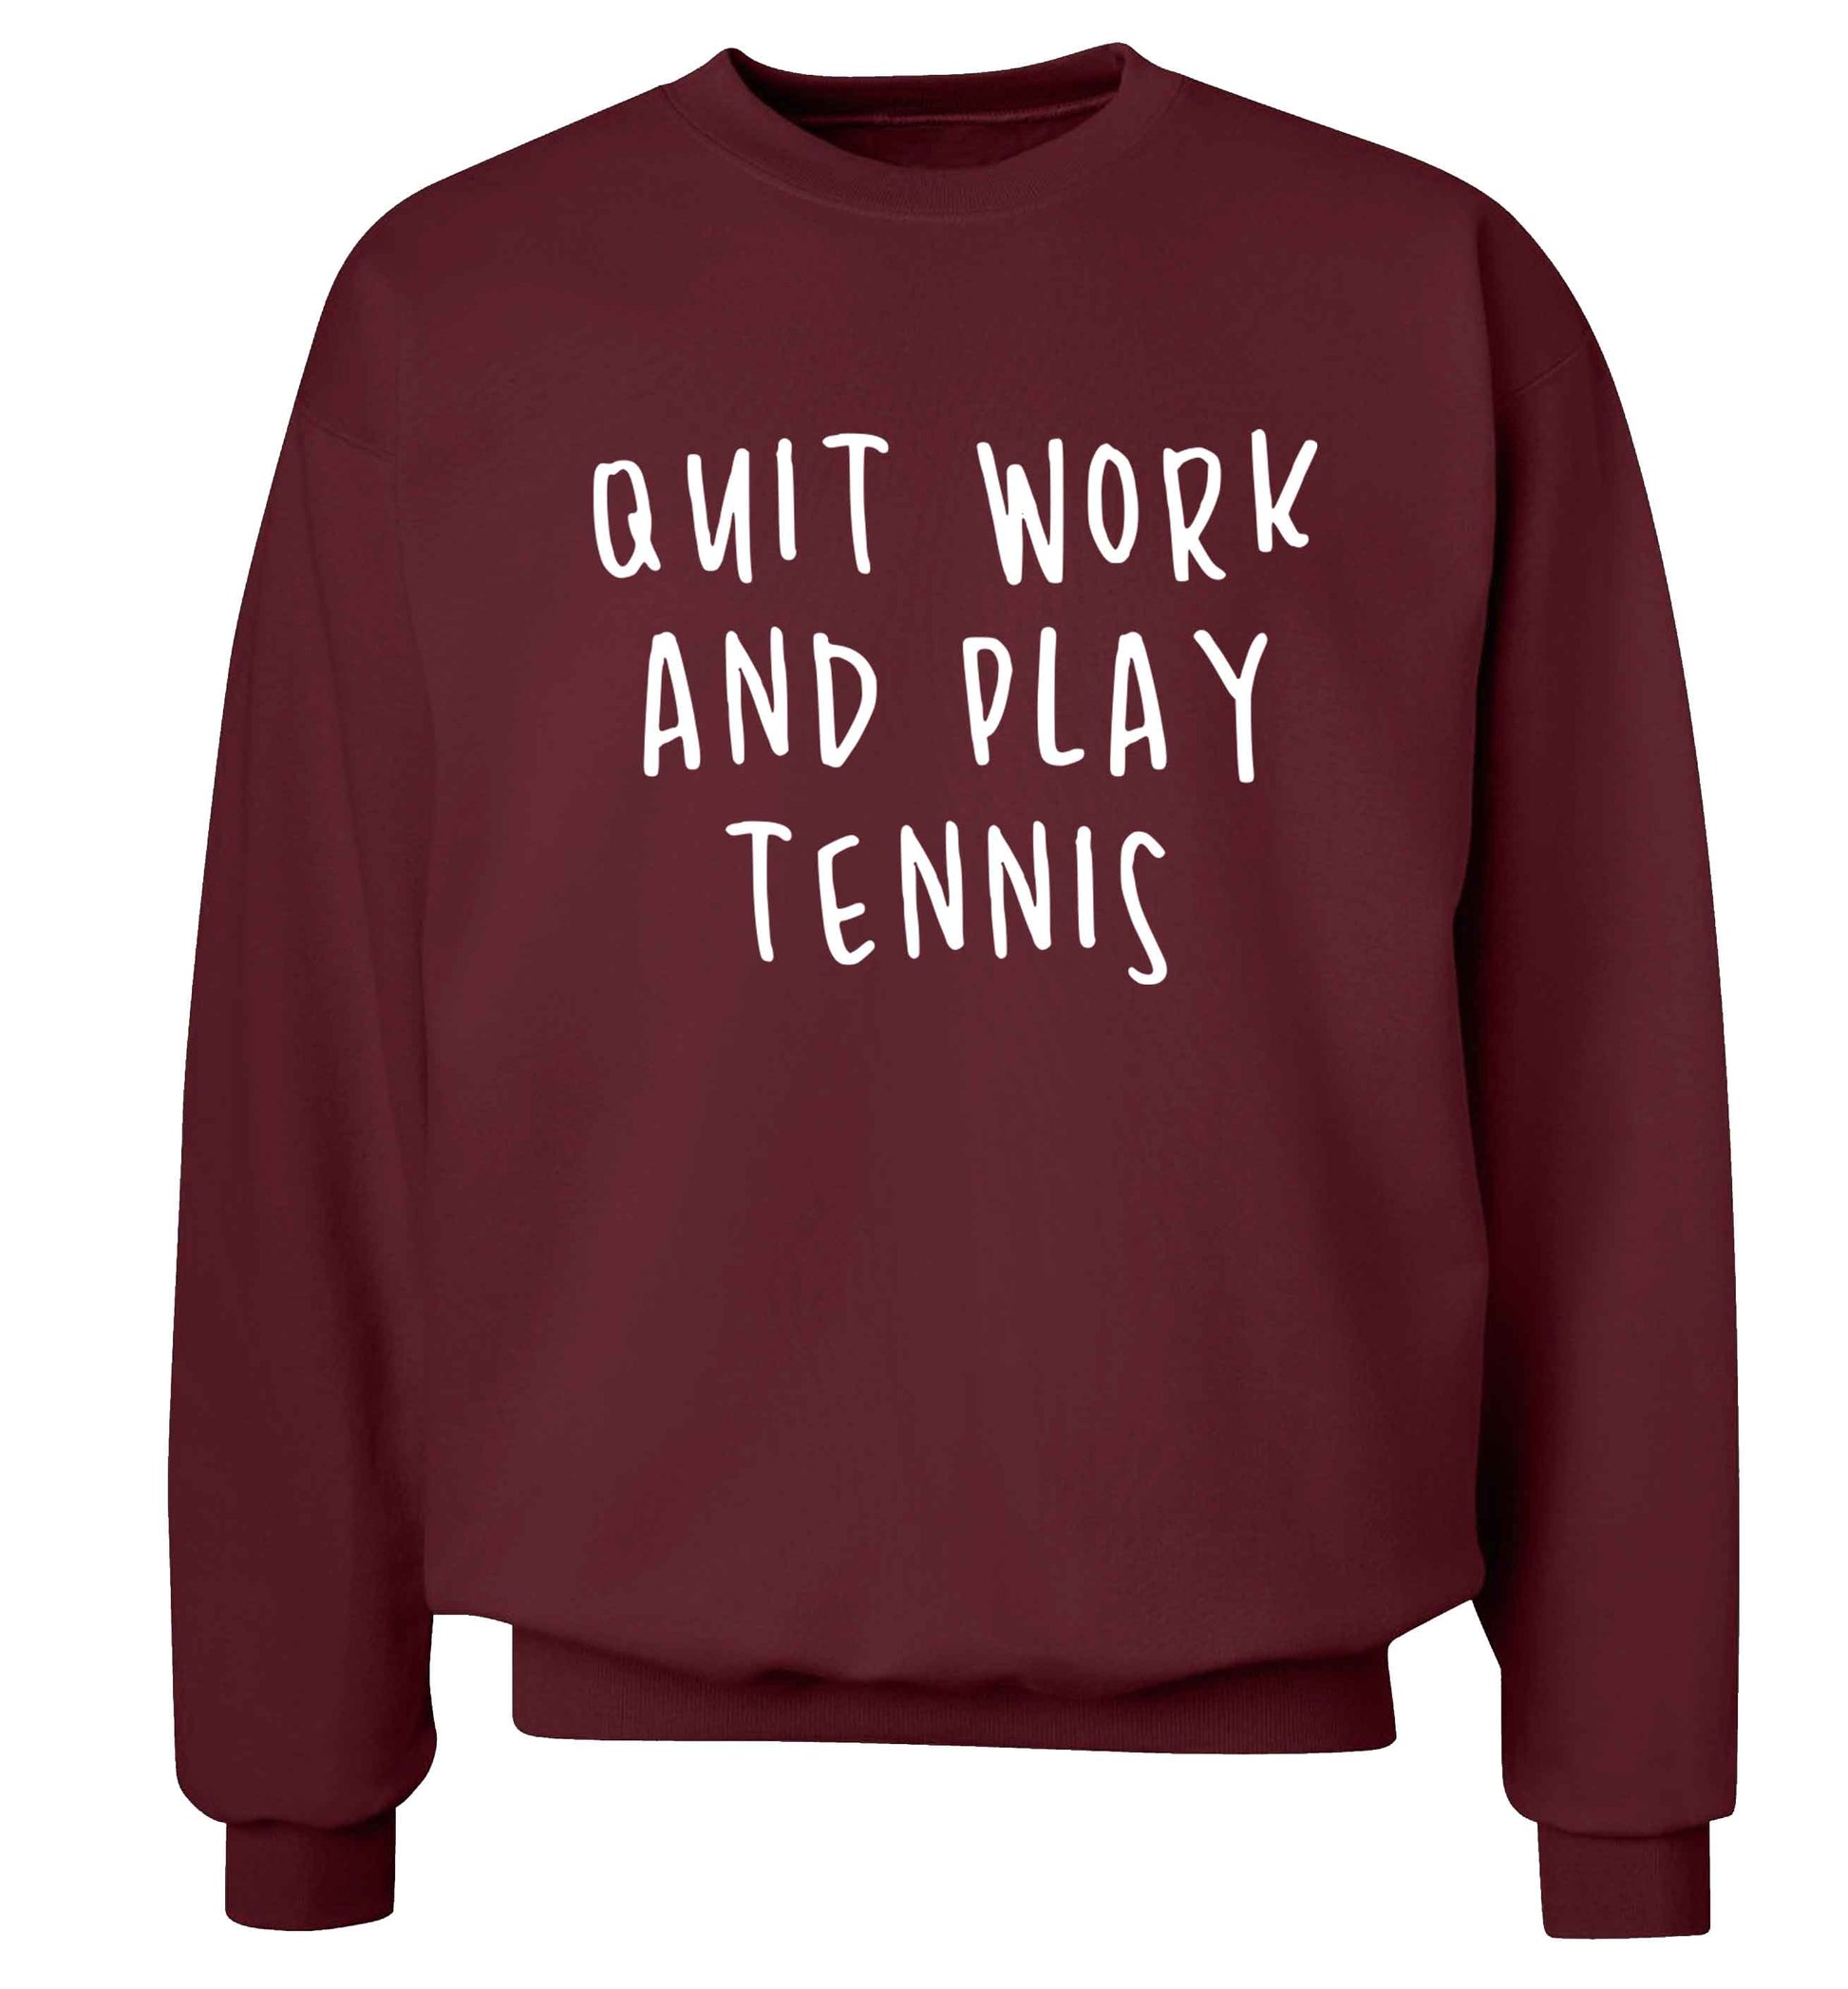 Quit work and play tennis Adult's unisex maroon Sweater 2XL